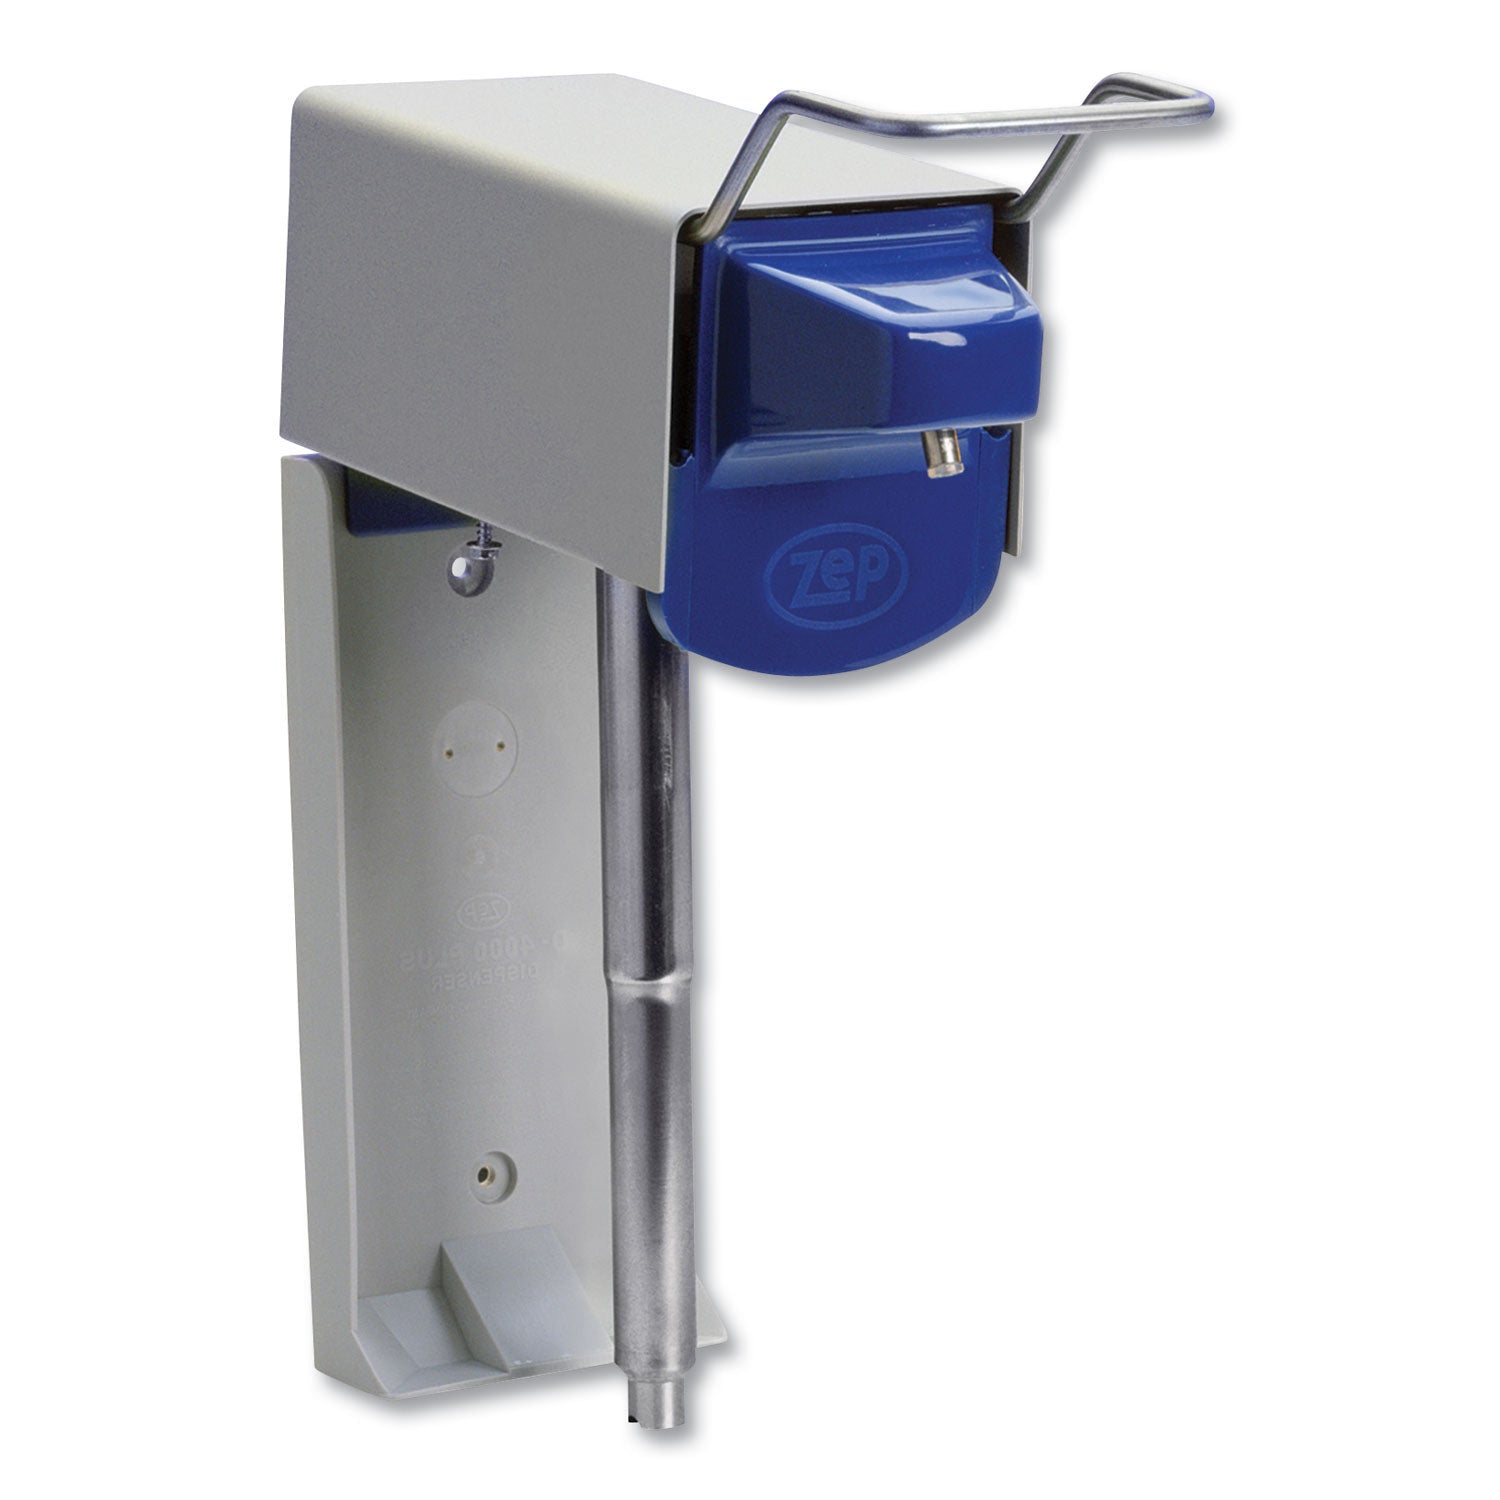 heavy-duty-hand-care-wall-mount-system-1-gal-5-x-4-x-14-silver-blue_zpe600101 - 1